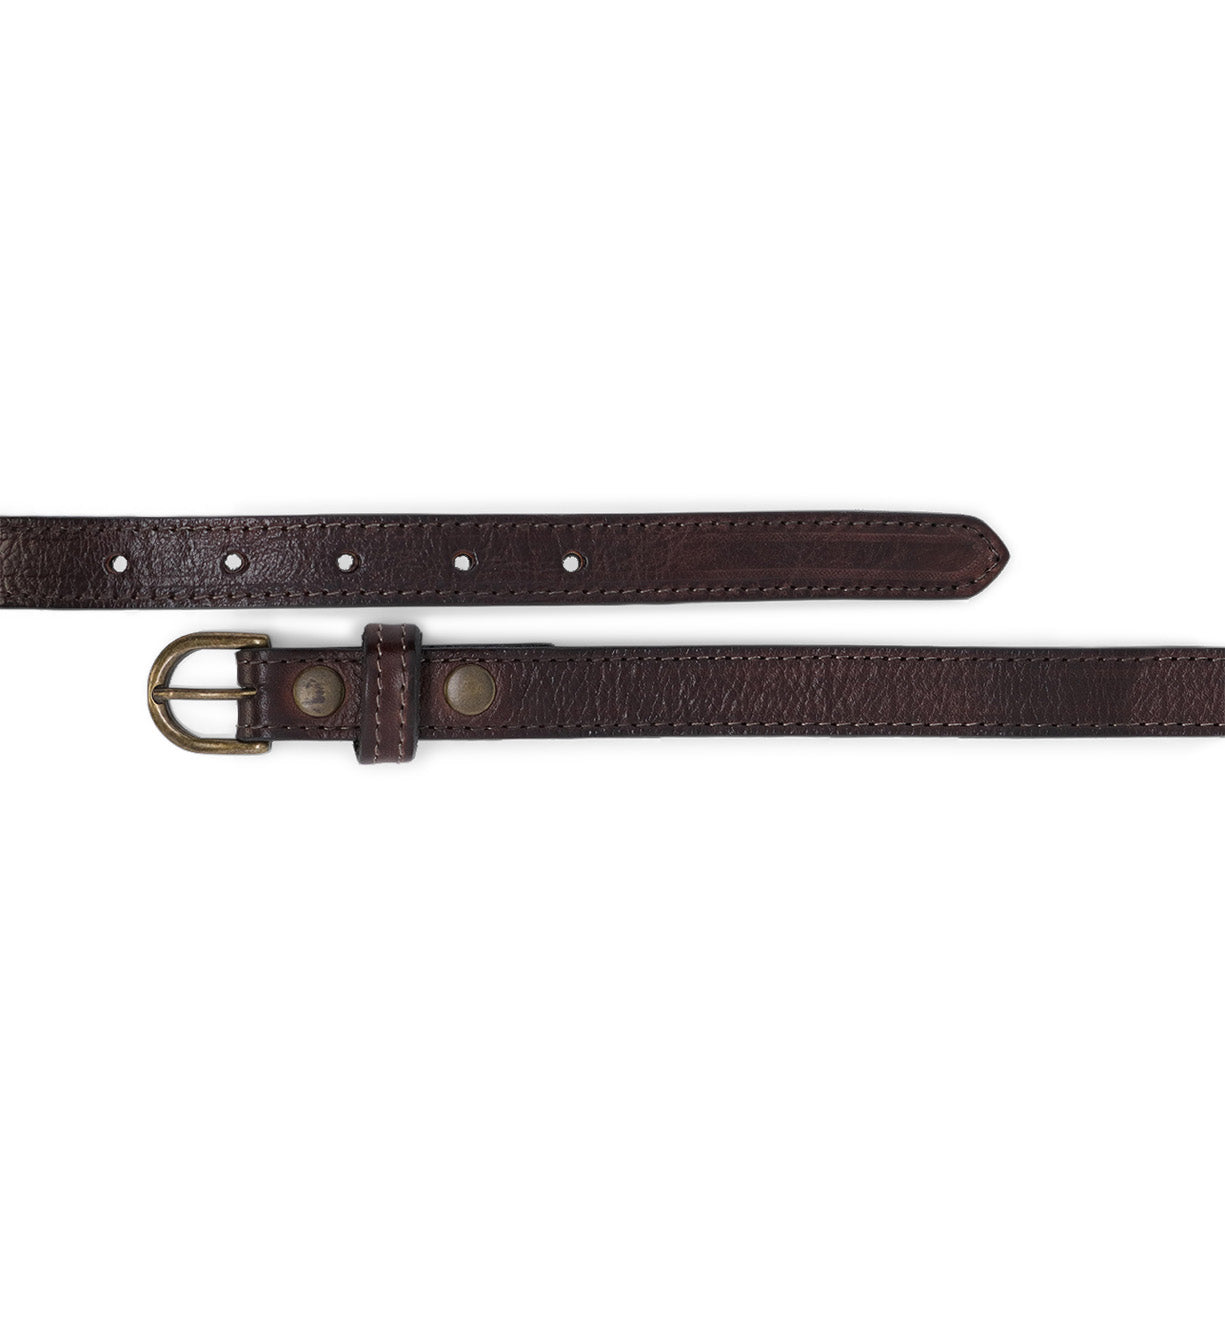 A Monae brown leather belt with a metal buckle by Bed Stu.